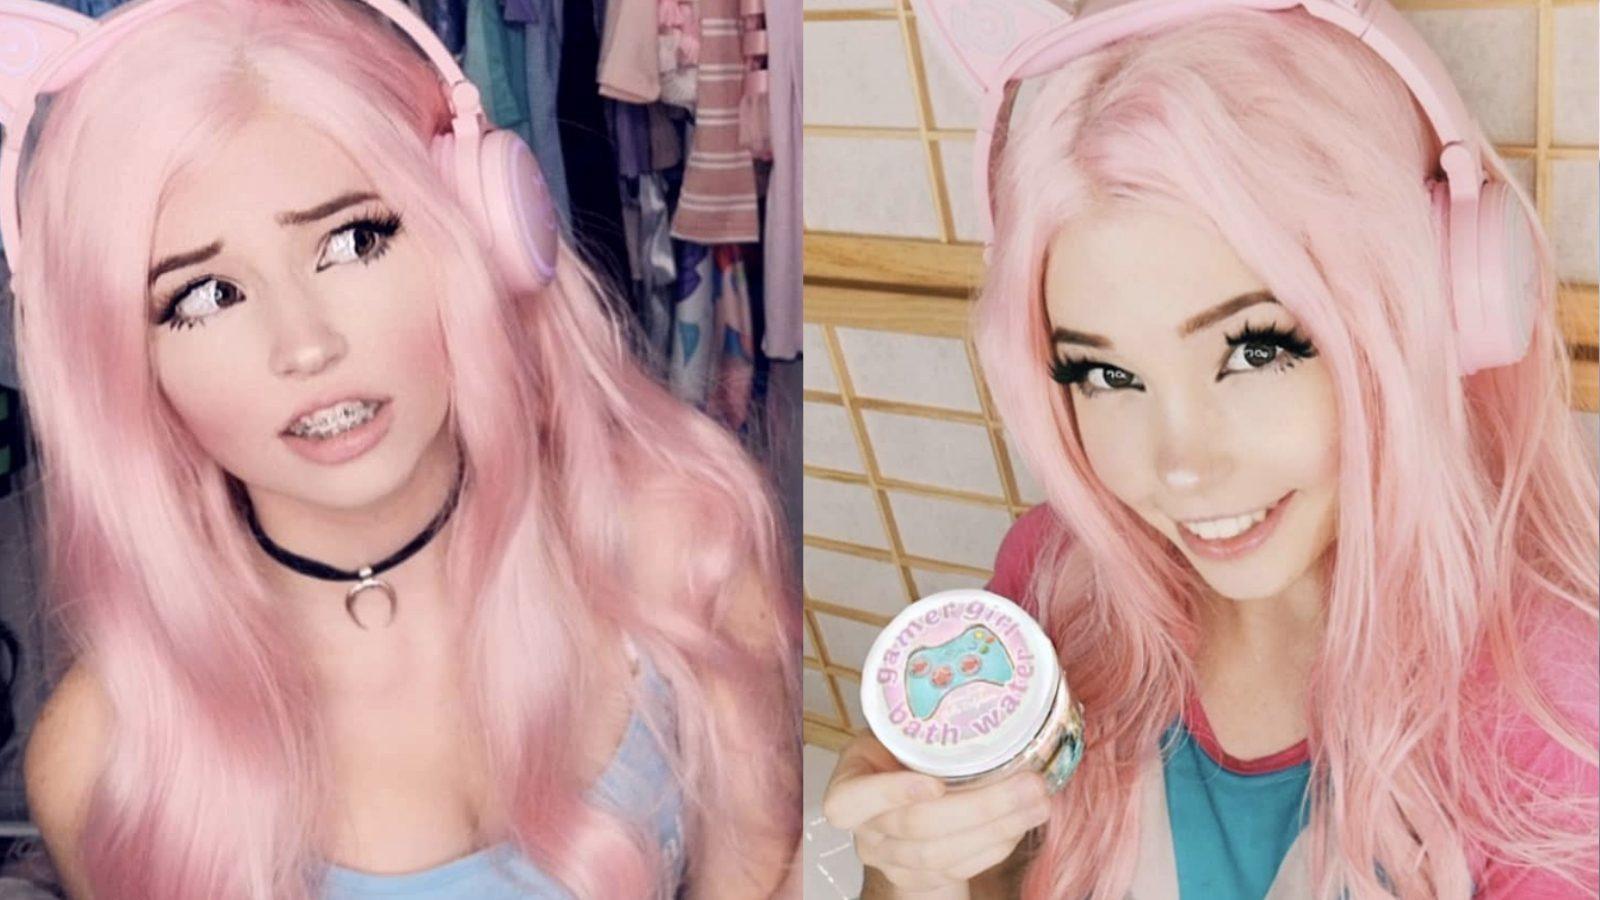 H3h3 shares the craziest theory behind Belle Delphine's 'disappearance' -  Dexerto